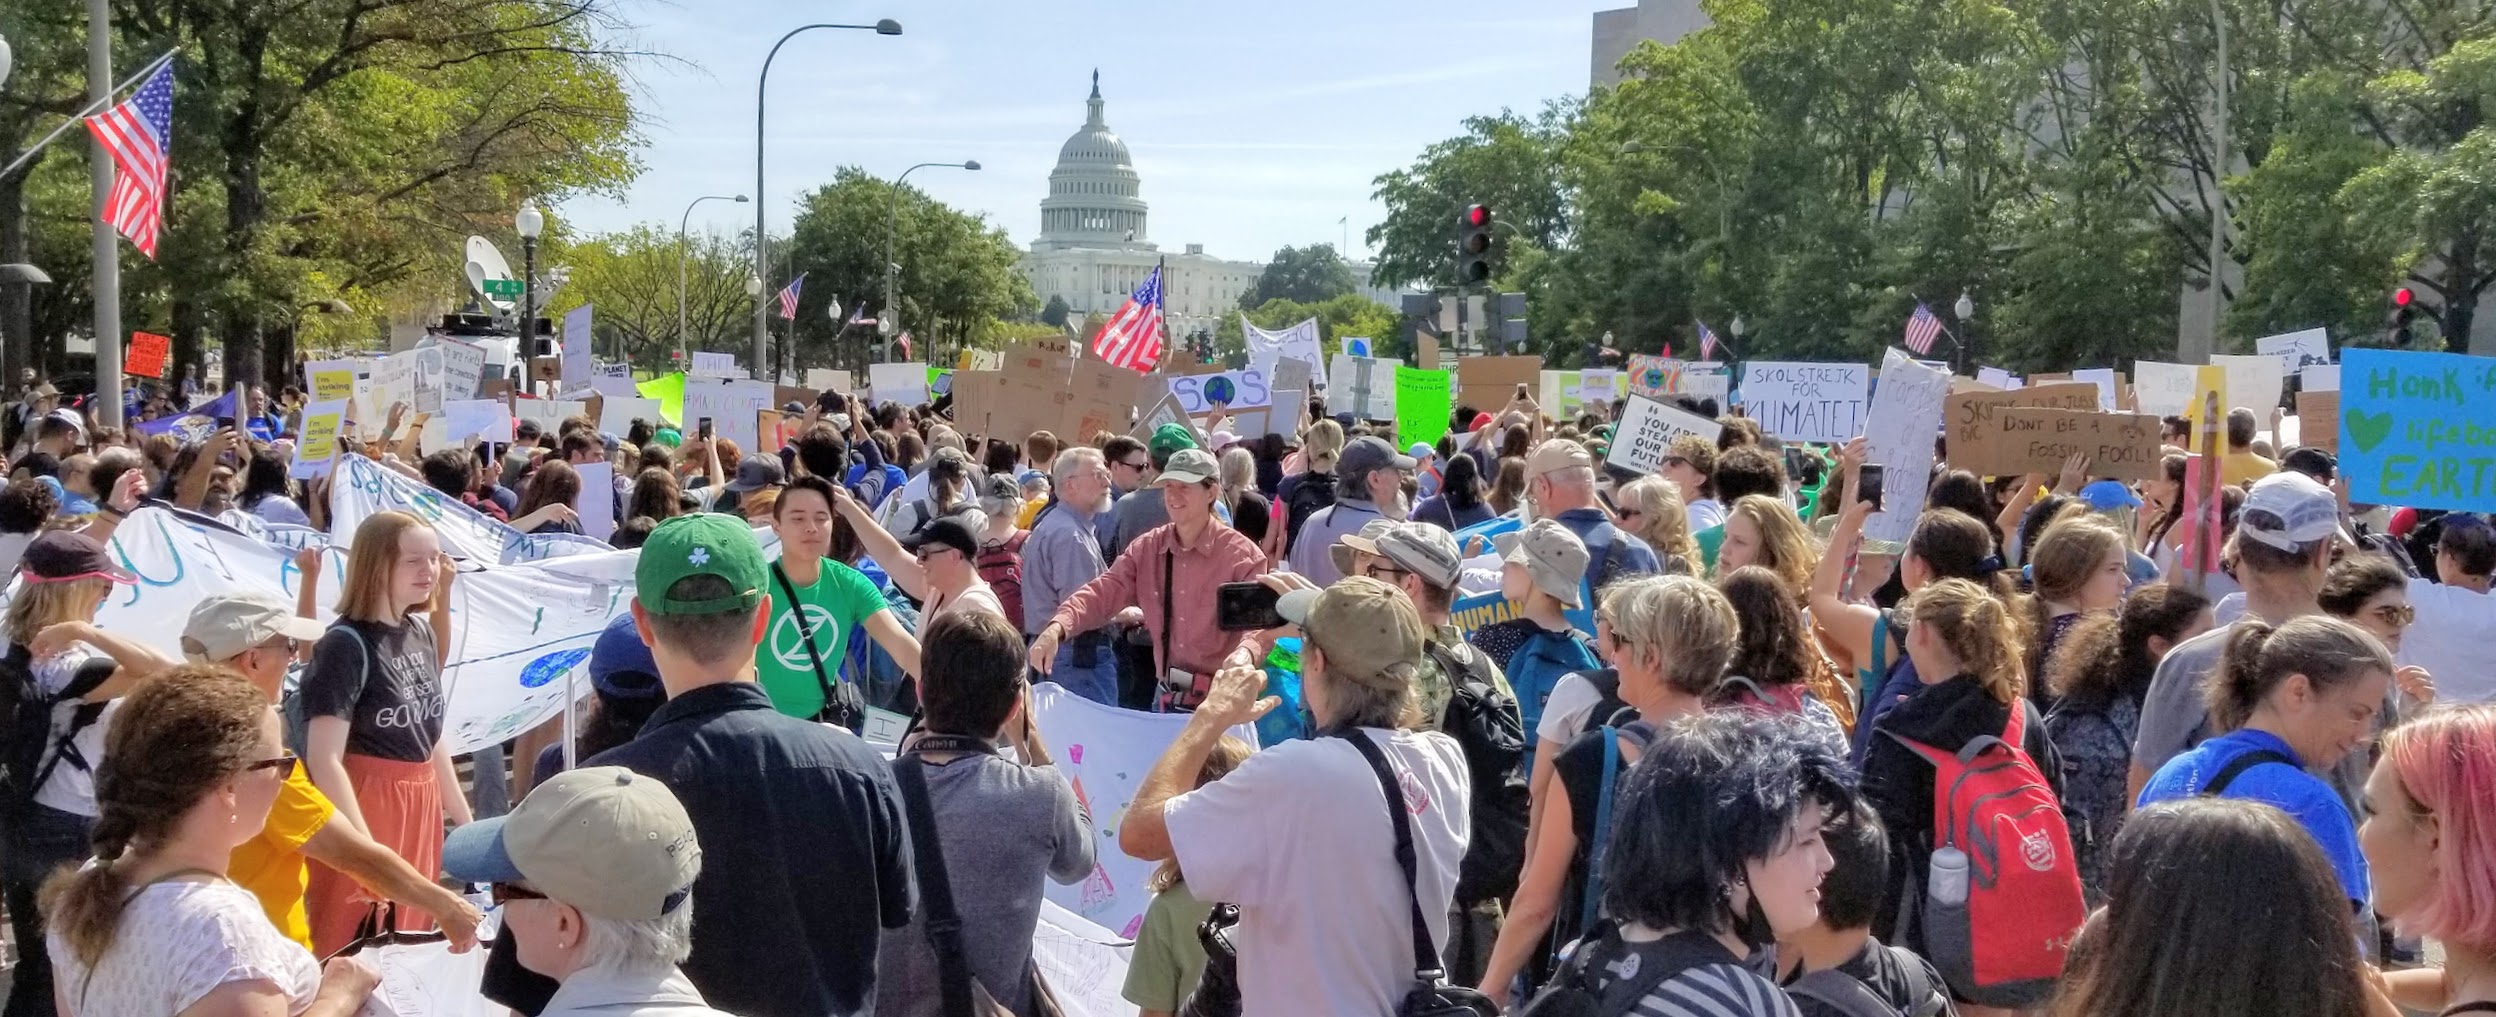 A picture from the Global Climate Strike March in Washington, DC, September 20th, 2019